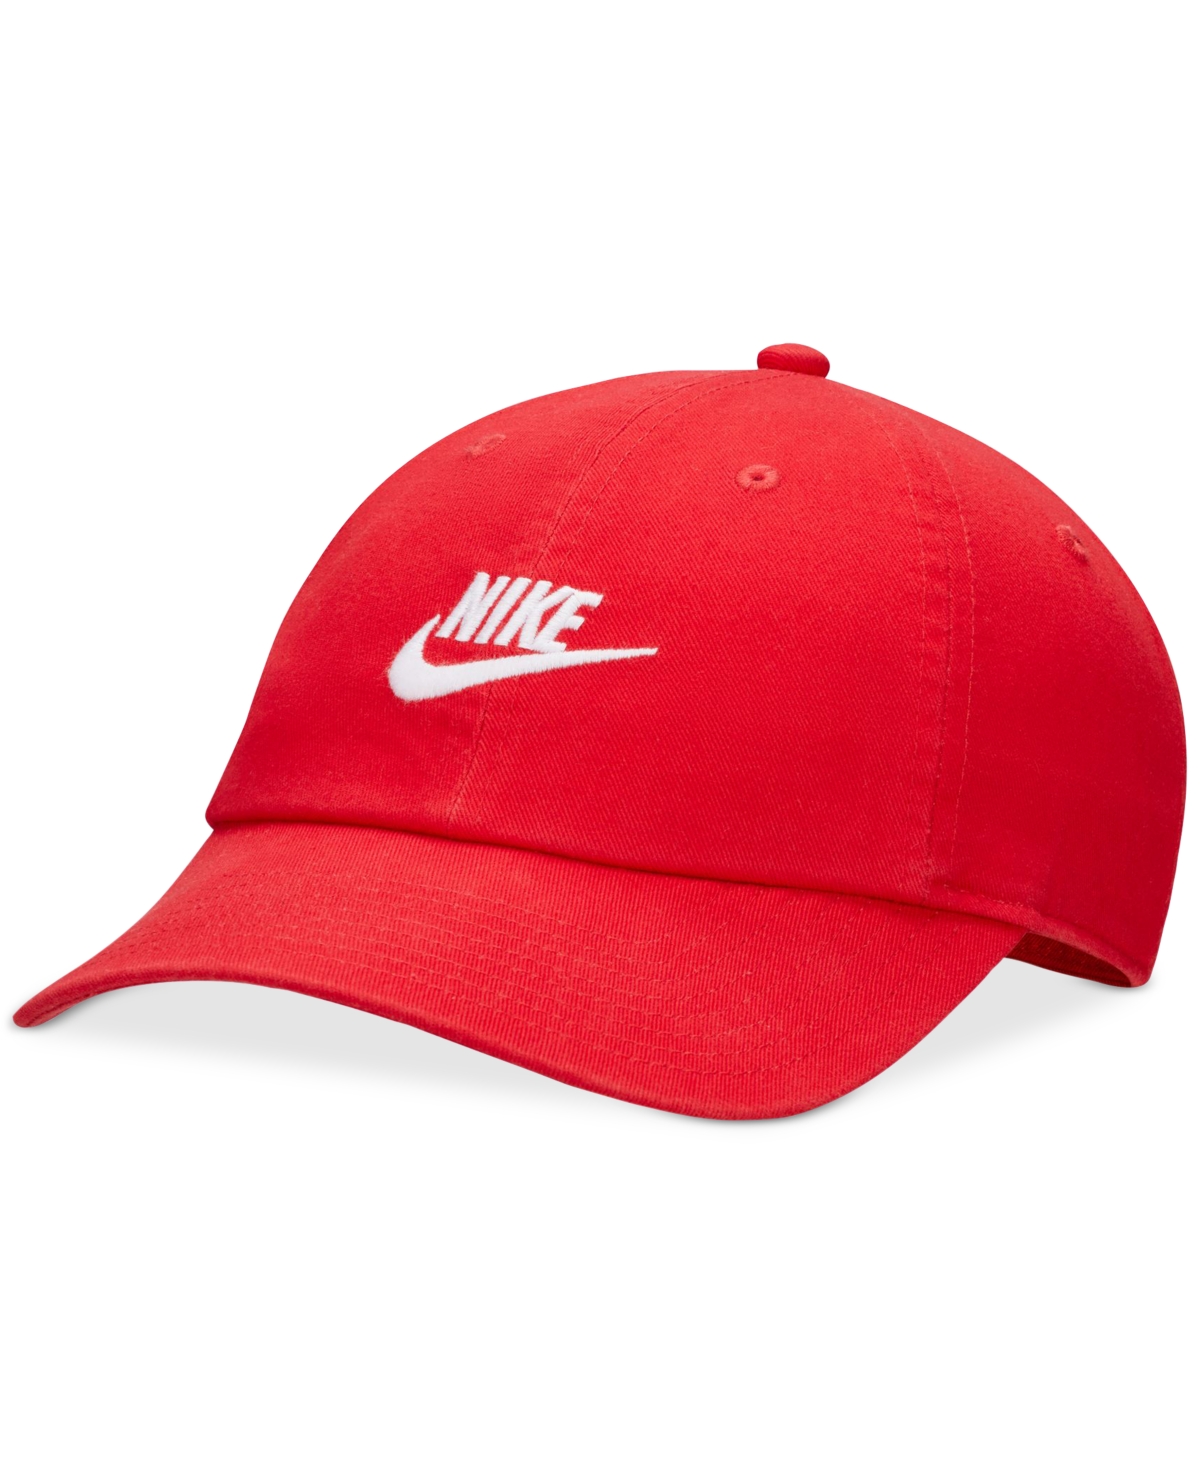 Nike Men's Club Logo Embroidered Cap In University Red